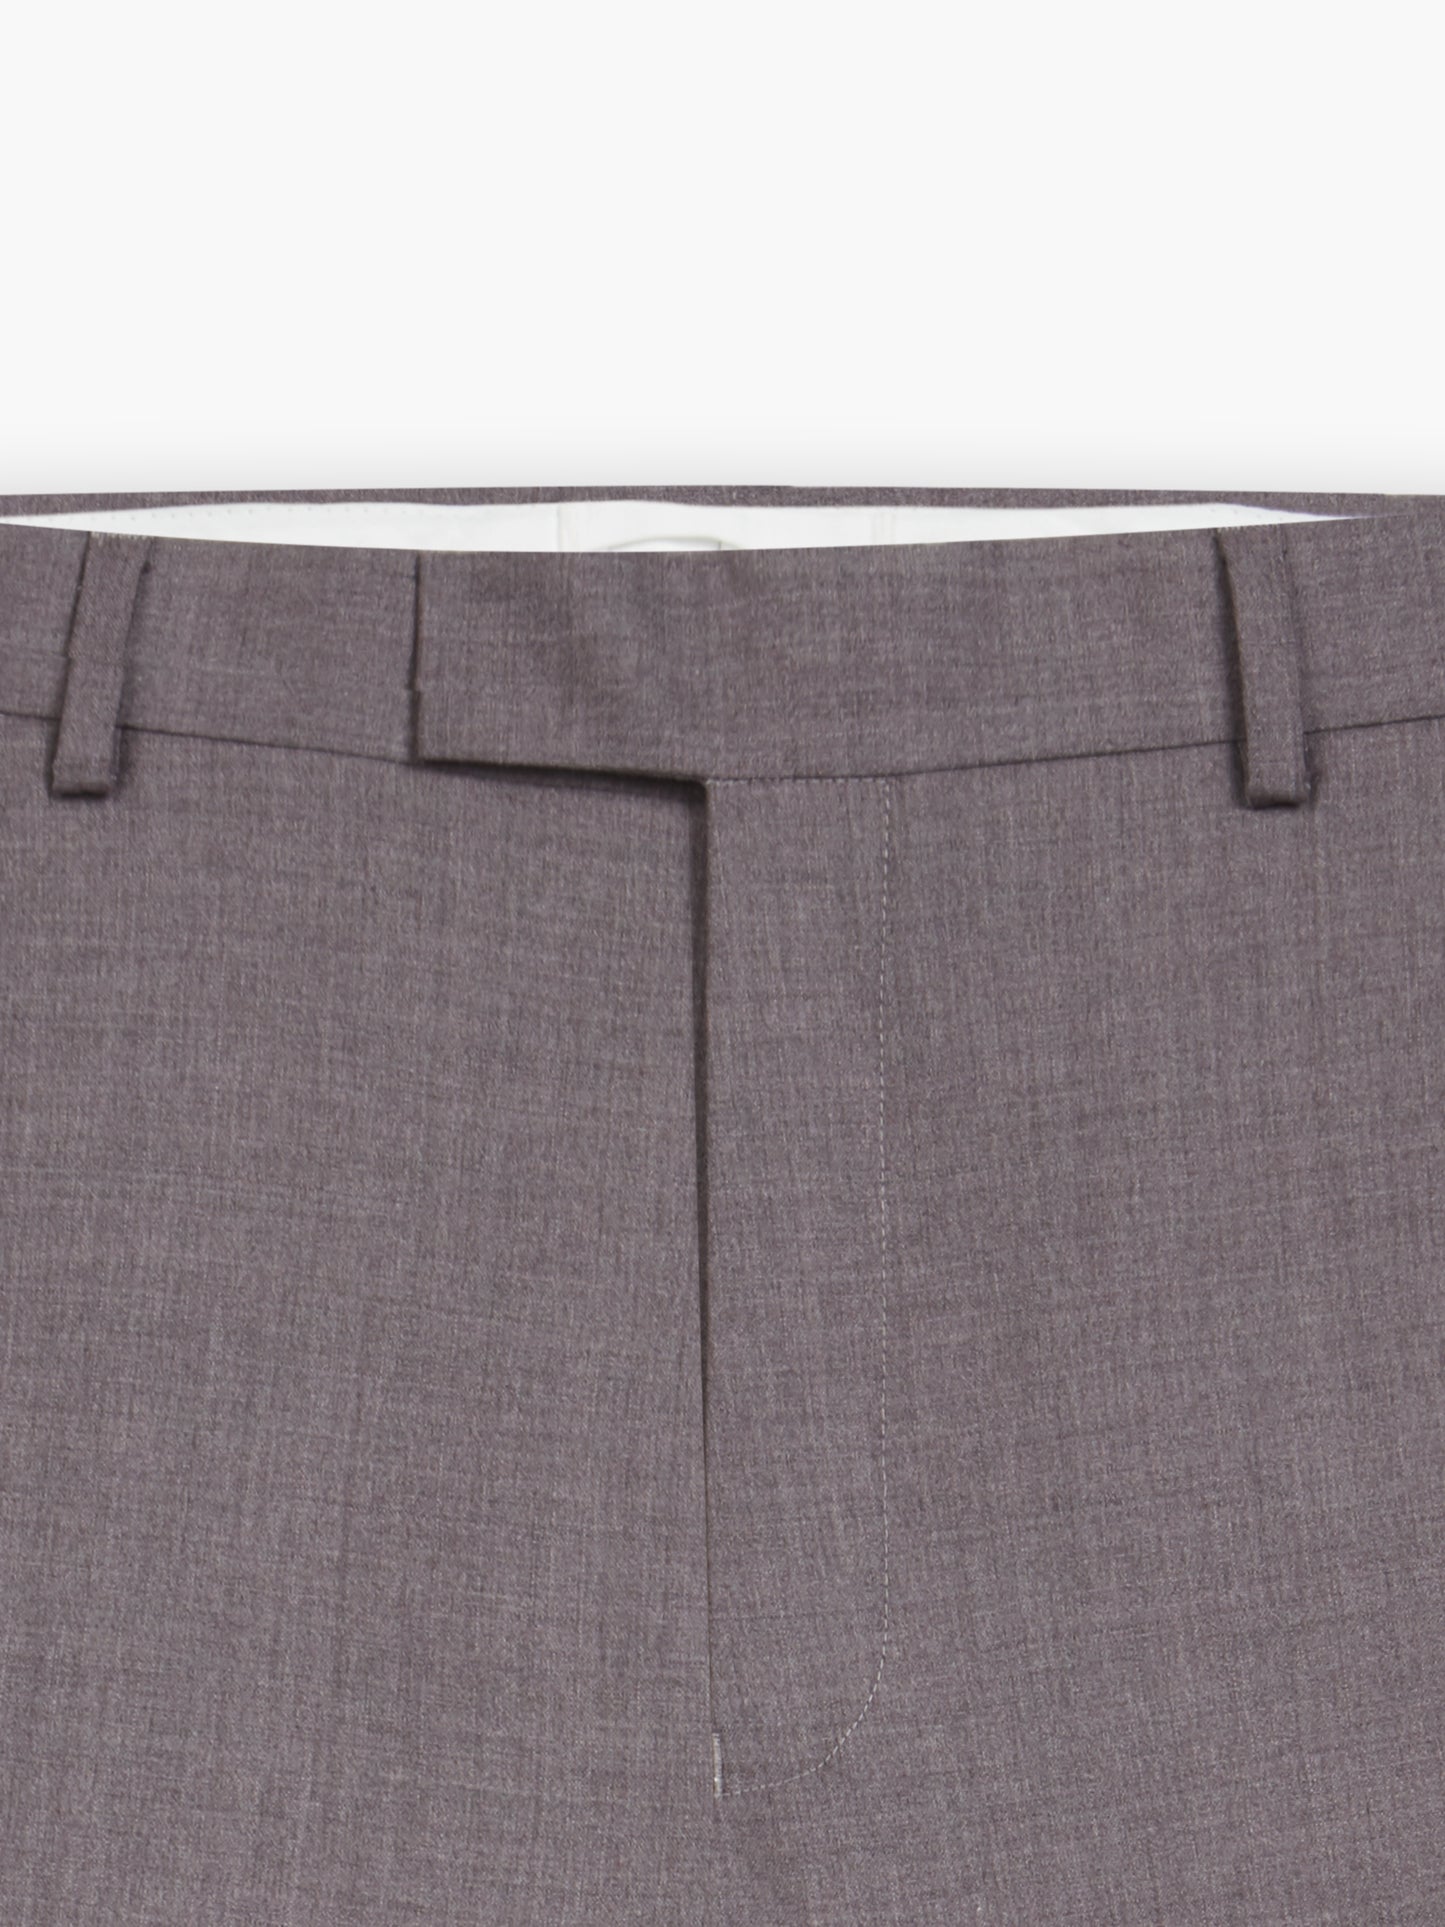 Hedsor Woven in Italy Slim Fit Burgundy Trousers